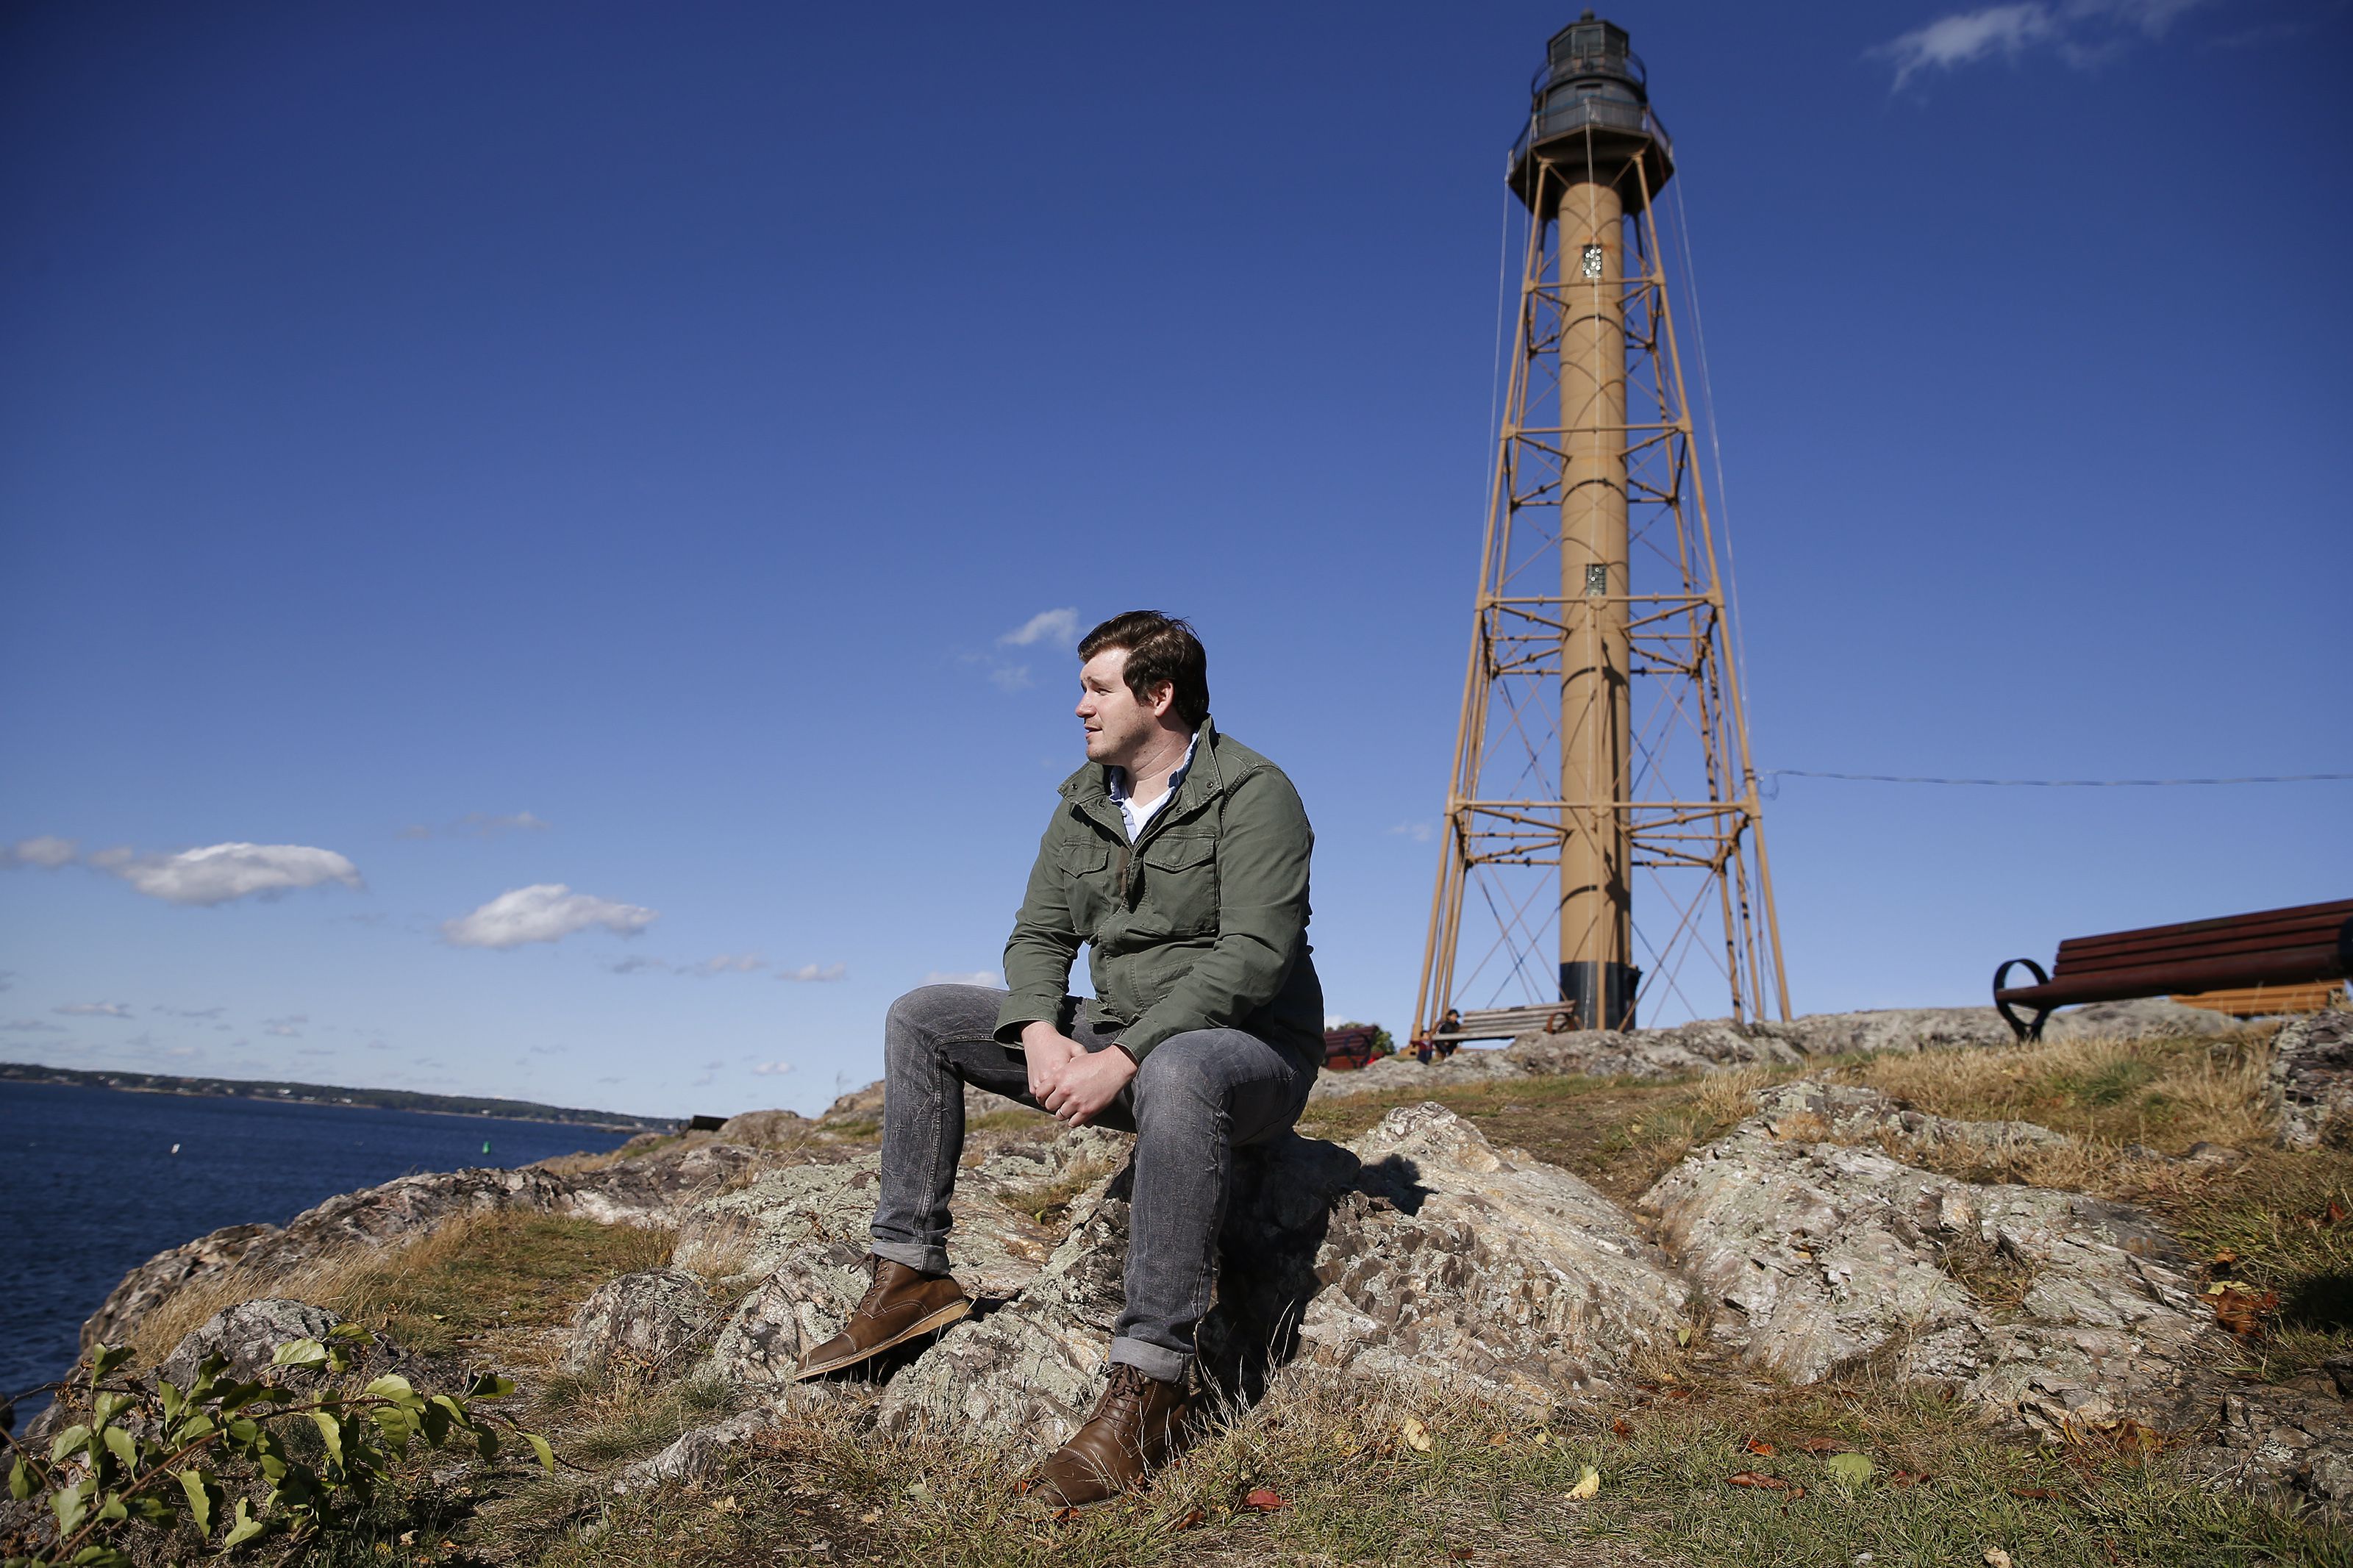 An old cast iron tower, a beacon of light are the stars of the show on the craggy edge of the Atlantic Ocean The Boston Globe